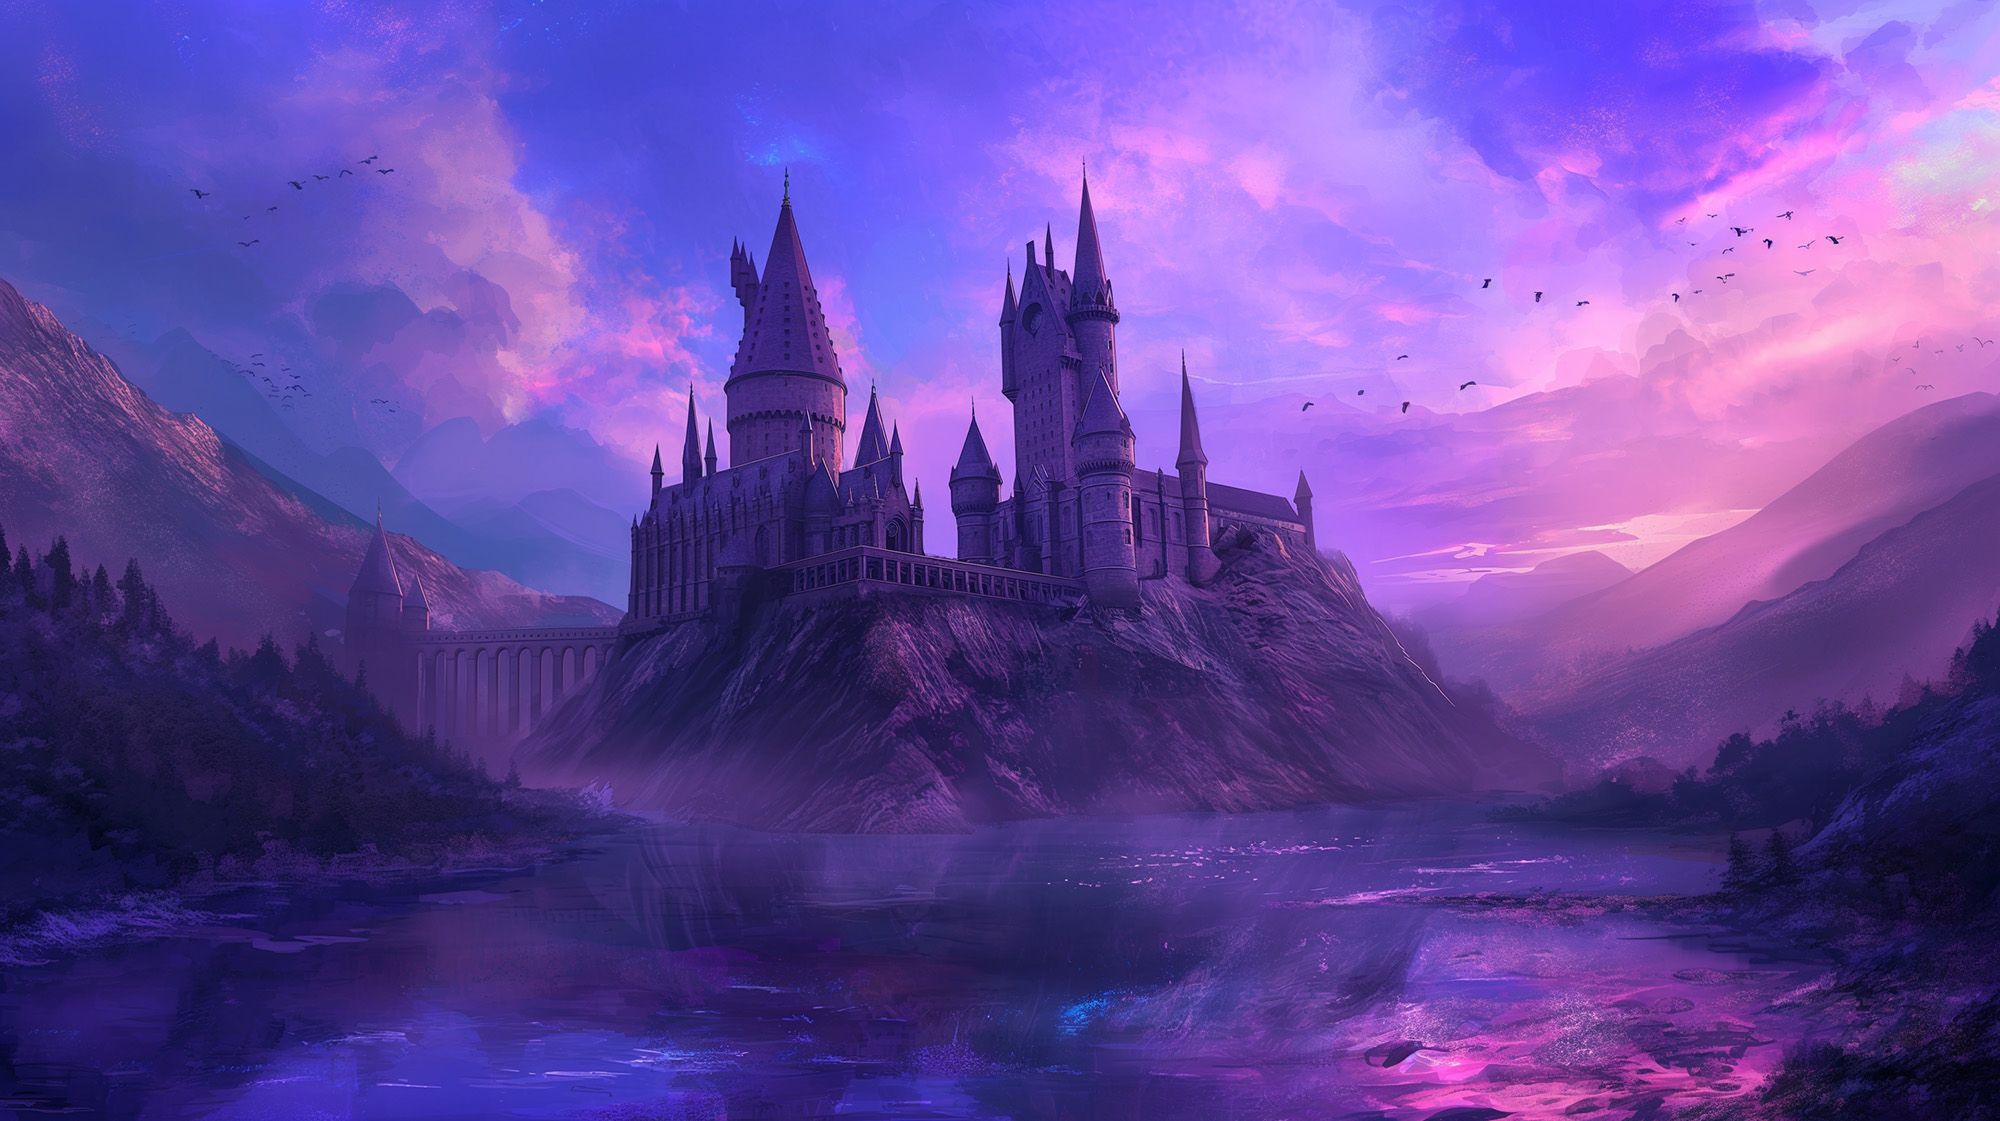 Beautiful image inspired by the castle Hogwarths in purple tones